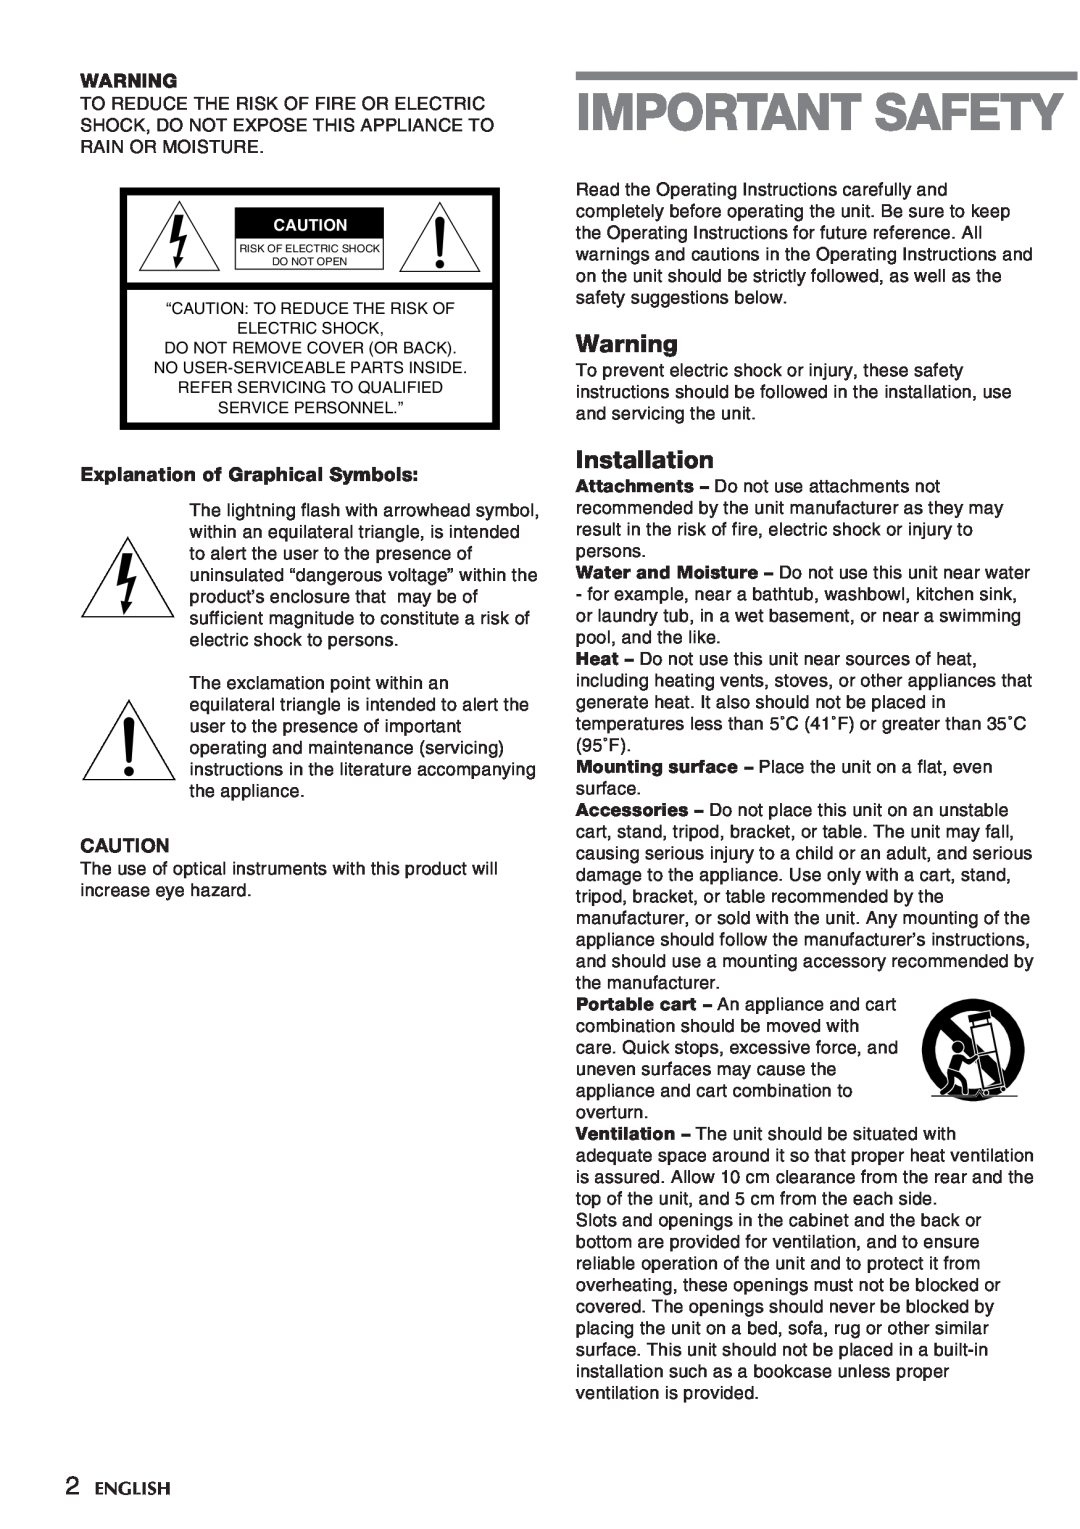 Aiwa CSD-FD99, CSD-FD88 manual Installation, Explanation of Graphical Symbols, English, Important Safety 